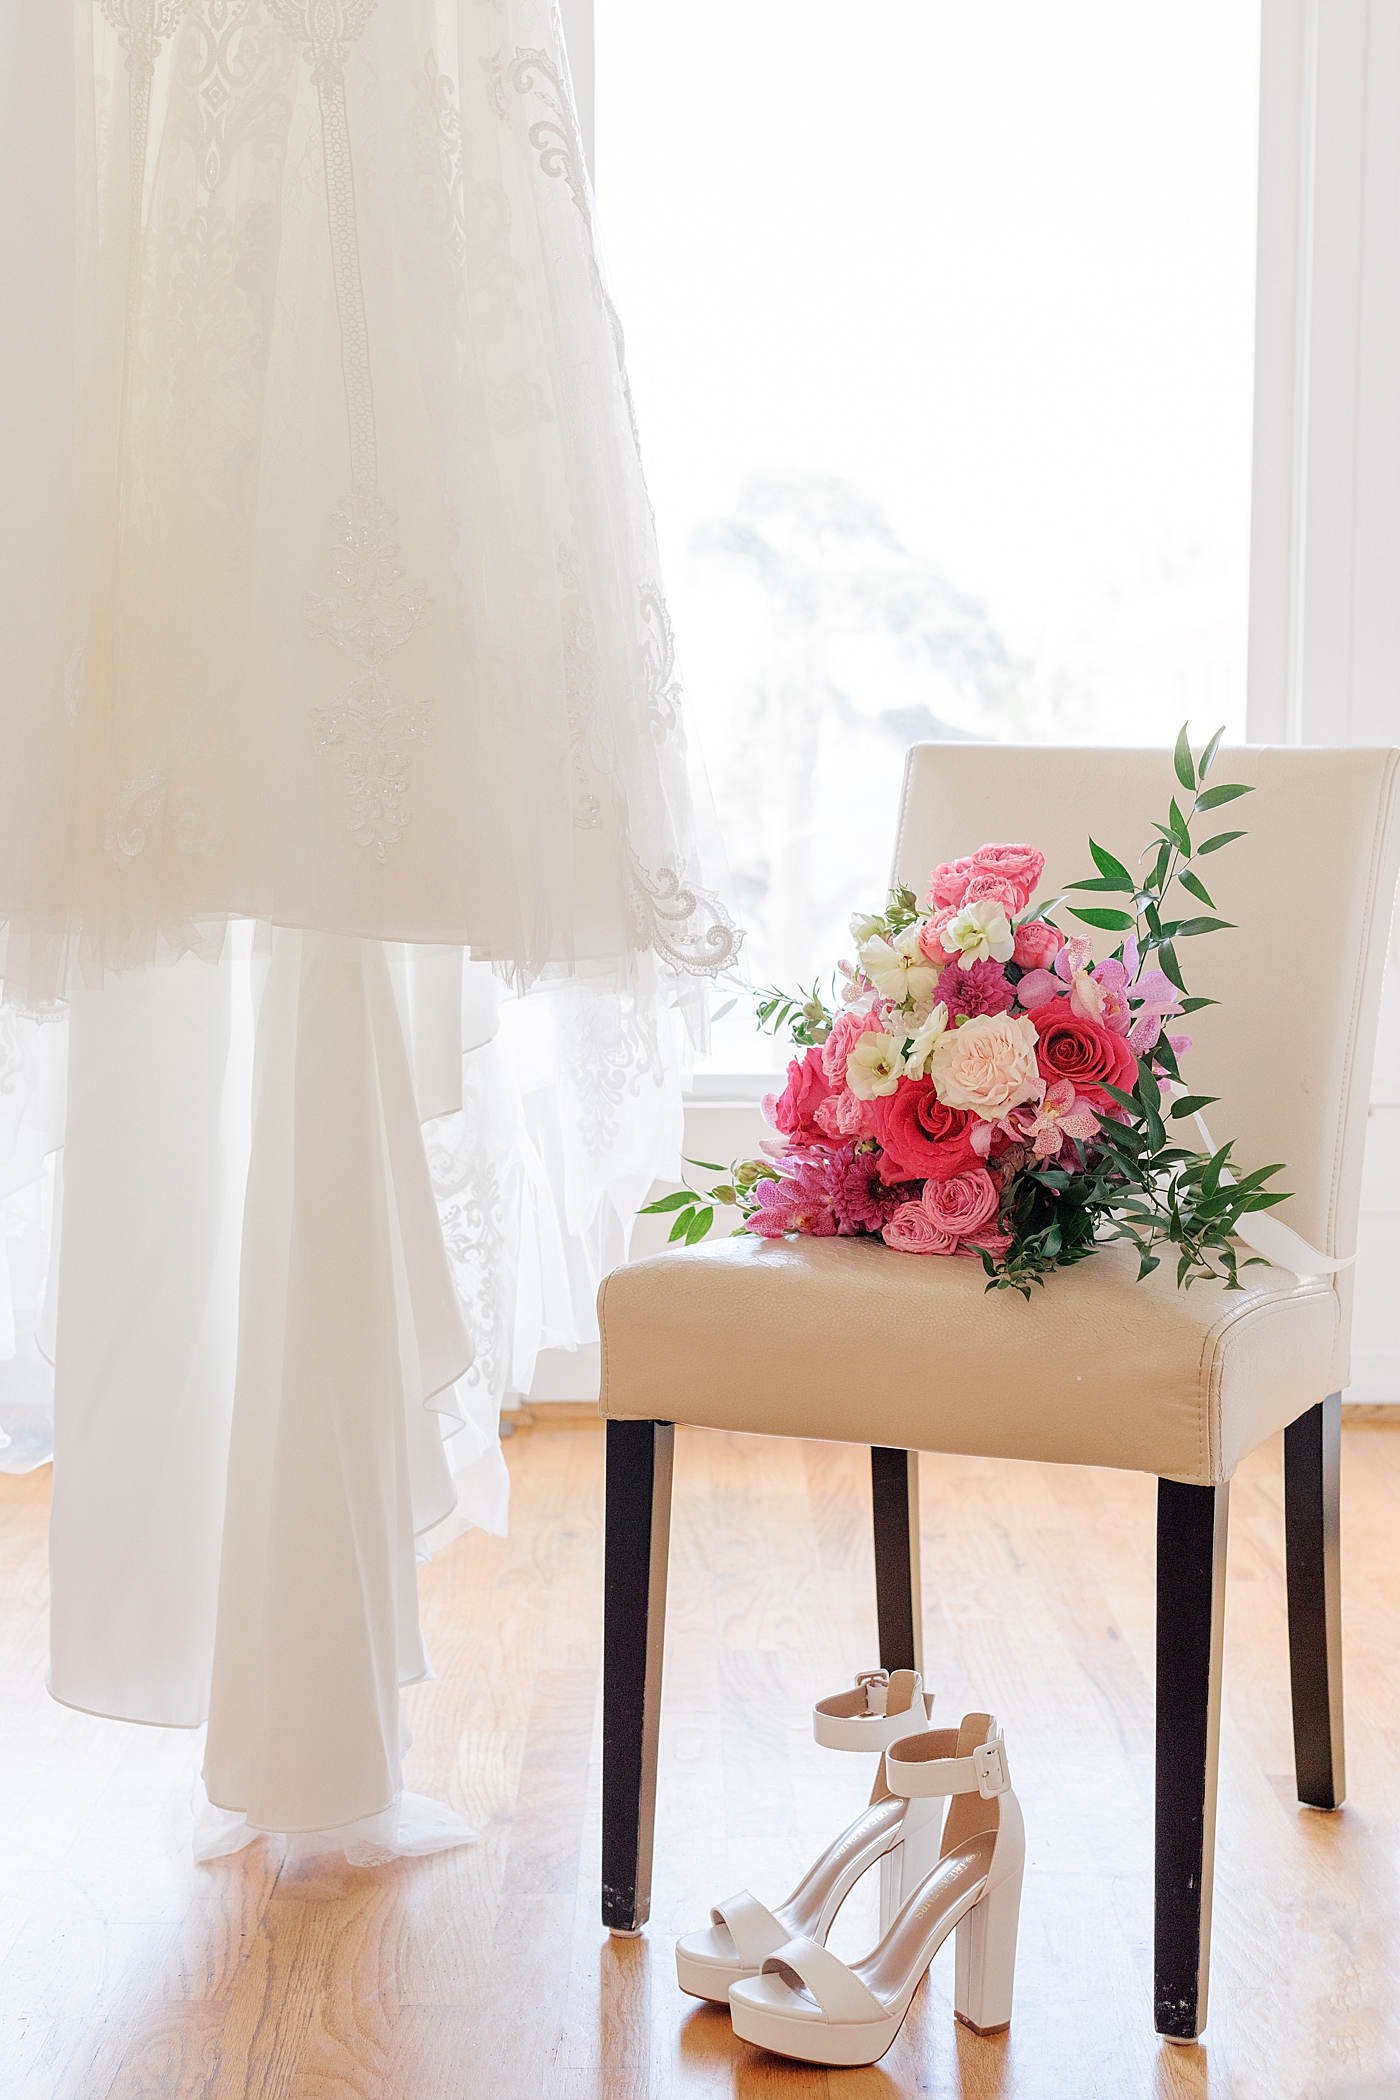 Wedding details of a bouquet on a chair, wedding shoes, and a wedding dress | Image by Hope Helmuth Photography